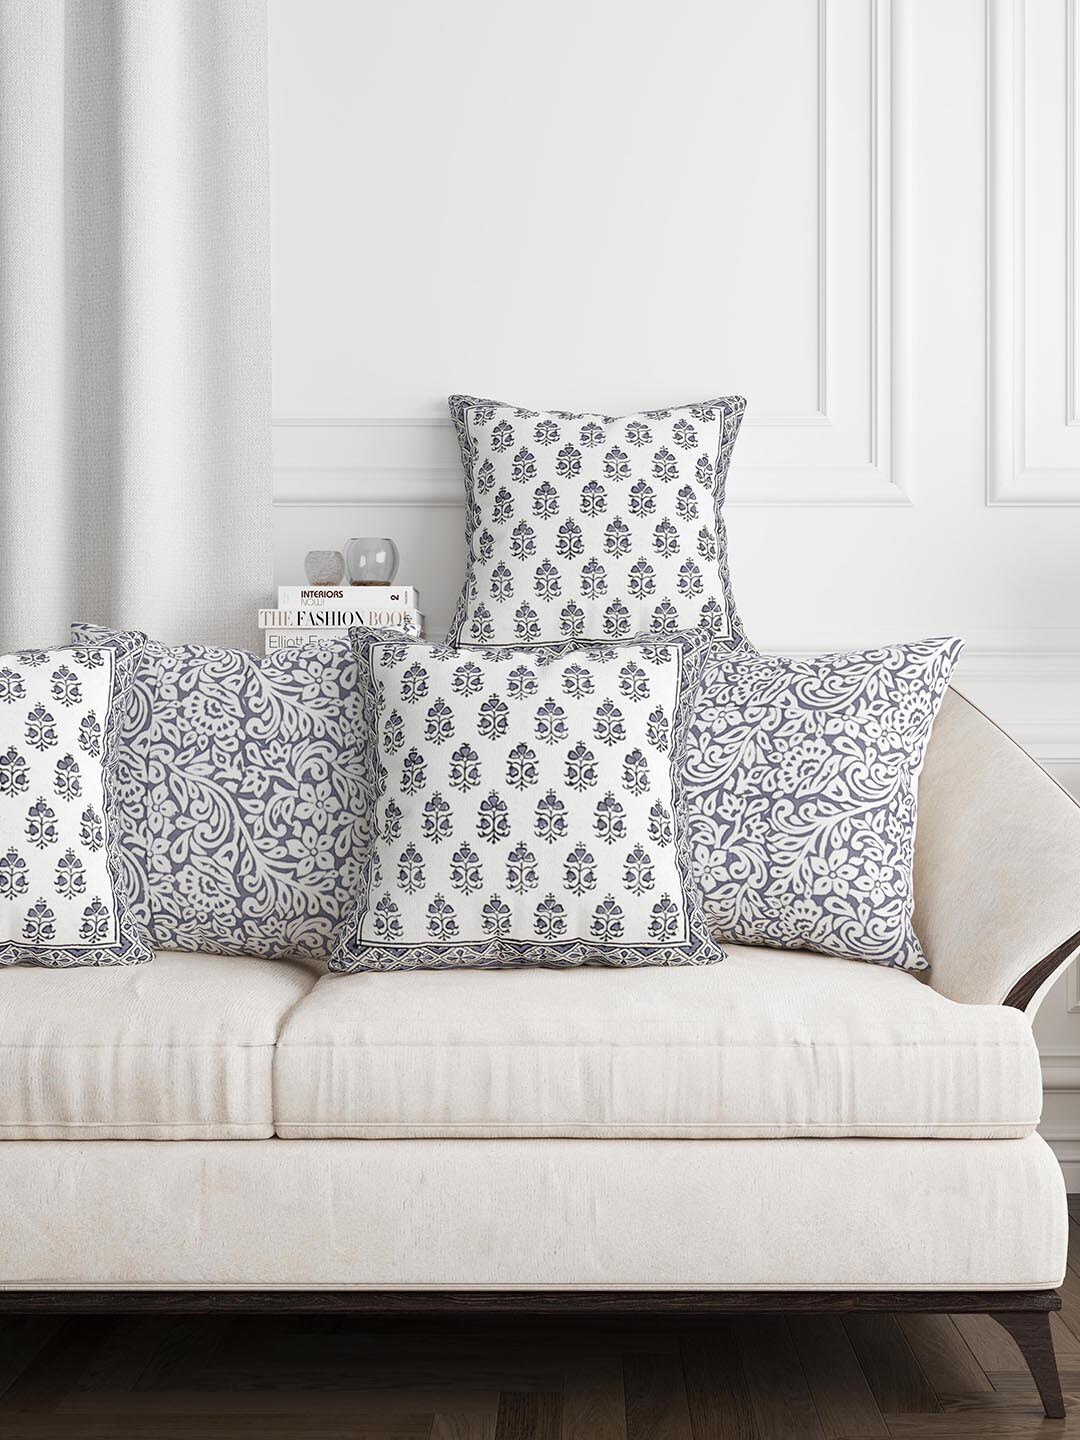 BLOCKS OF INDIA Grey & White Pack of 5 Ethnic Motifs Square Cushion Covers Price in India